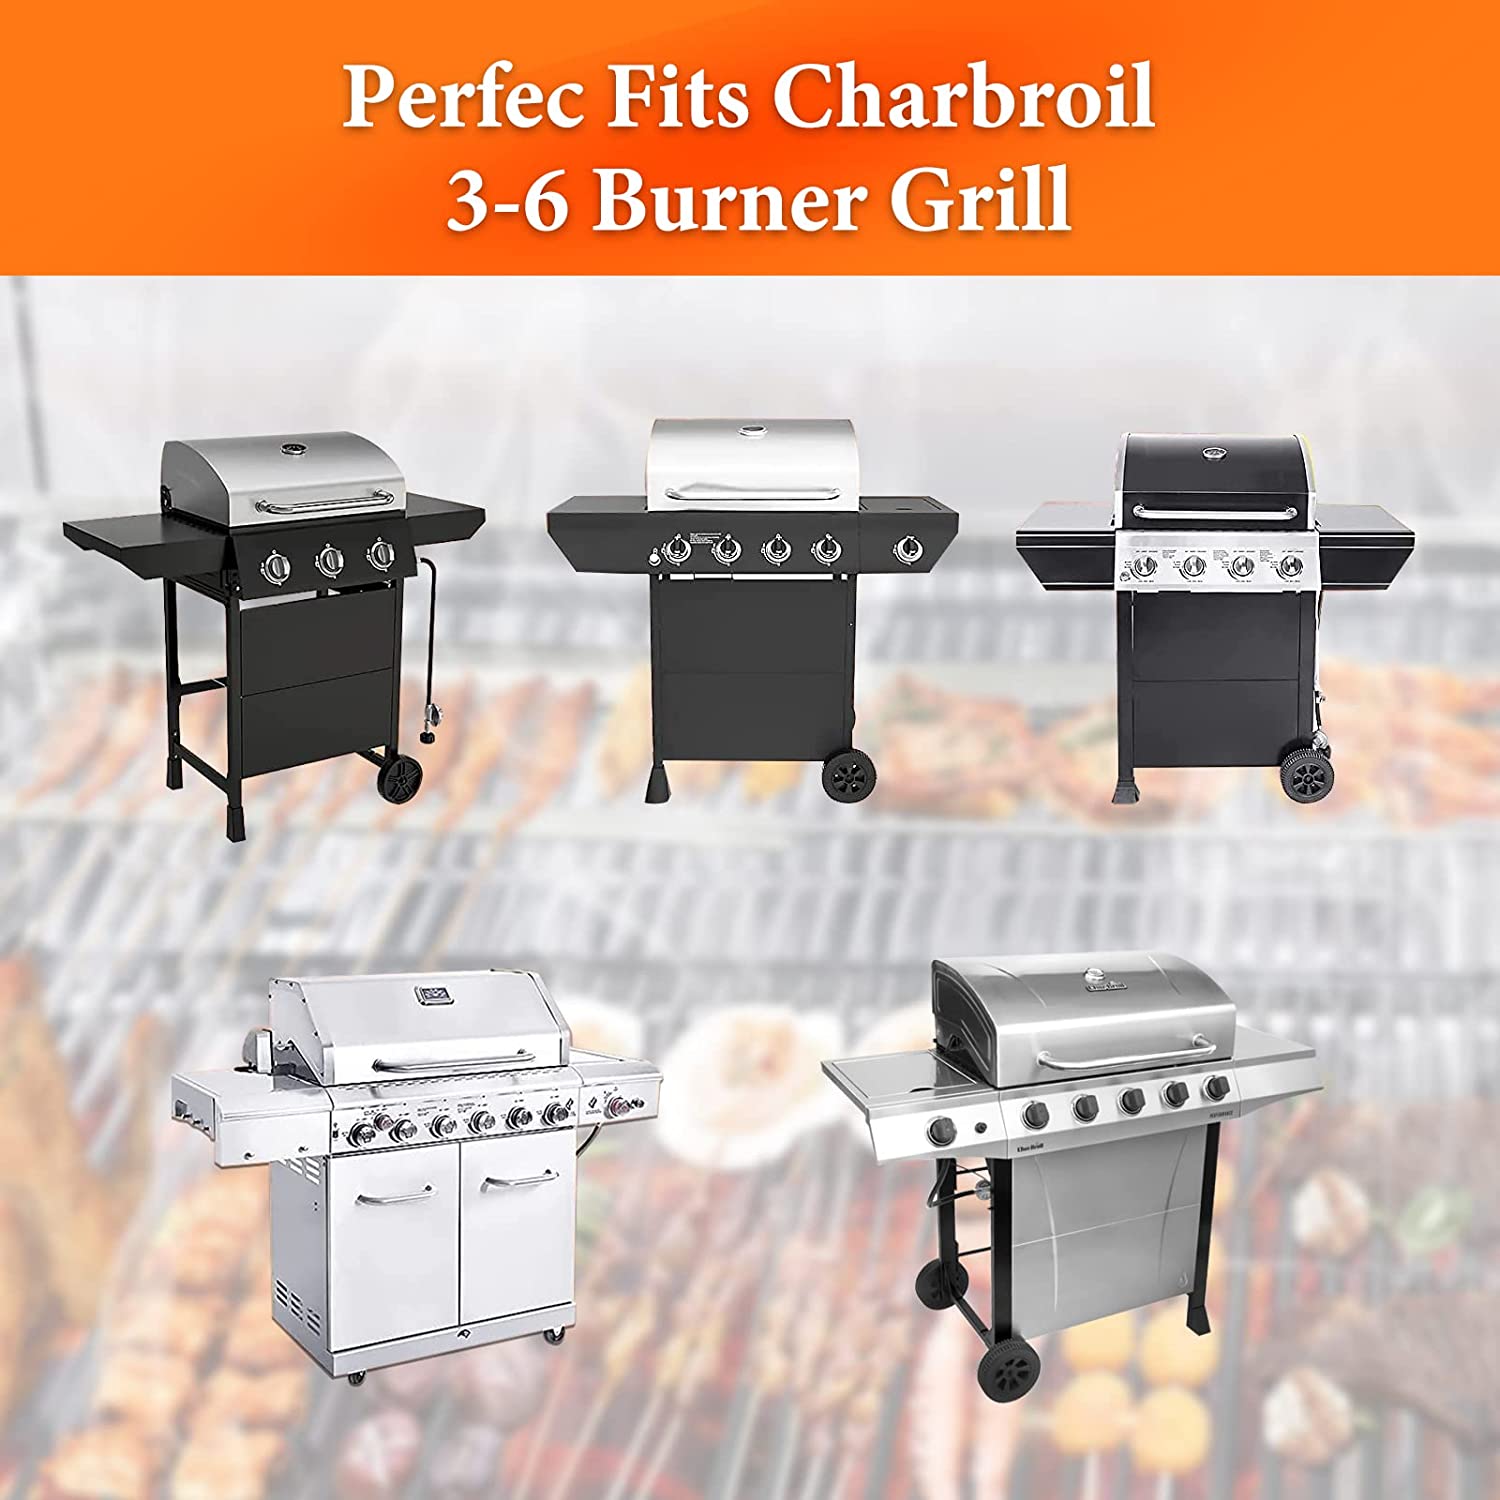 Grisun 18''-33'' Adjustable Grill Warming Rack for Charbroil 3&4&6 Burner Grill 463276517 463244819 466347017 463275517 463238218 Stainless Steel Warming Grate Replacements,G560-0004-W1 G432-0001-W1 - image 2 of 15